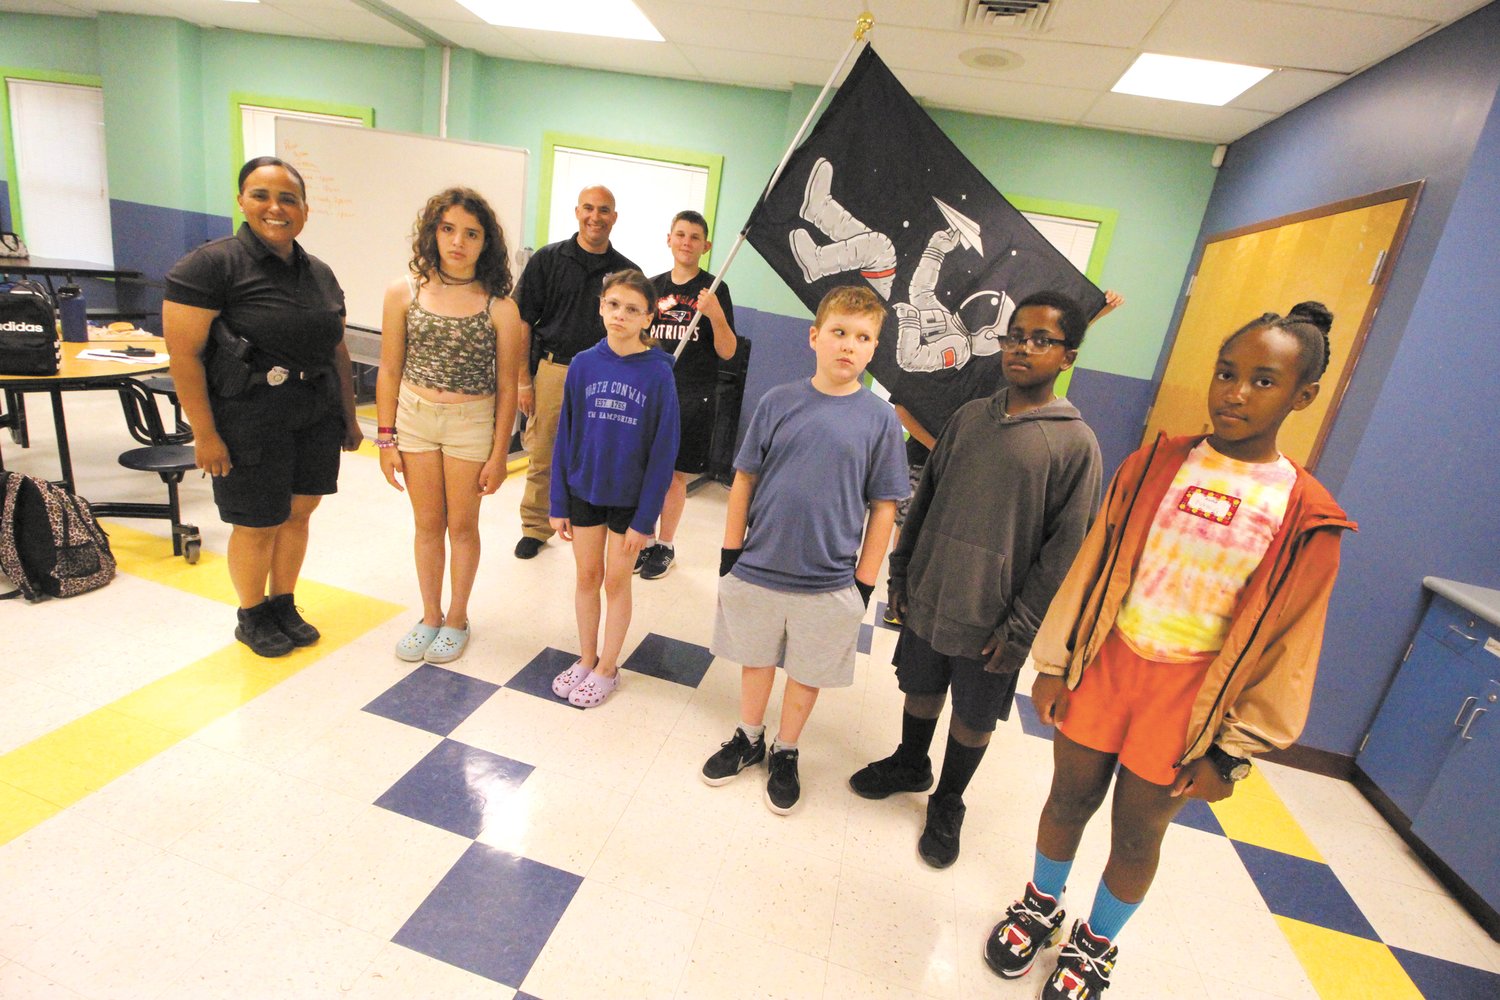 THEIR FLAG: Campers in the Warwick Police Department Leadership Camp that started Monday at the Oakland Beach branch of the Warwick Boys and Girls Clubs chose an outer space banner under which to gather as they will be “exploring” new opportunities. School resource officers Rose Michel and Al Marano are running this session of the camp. (Warwick Beacon photo)